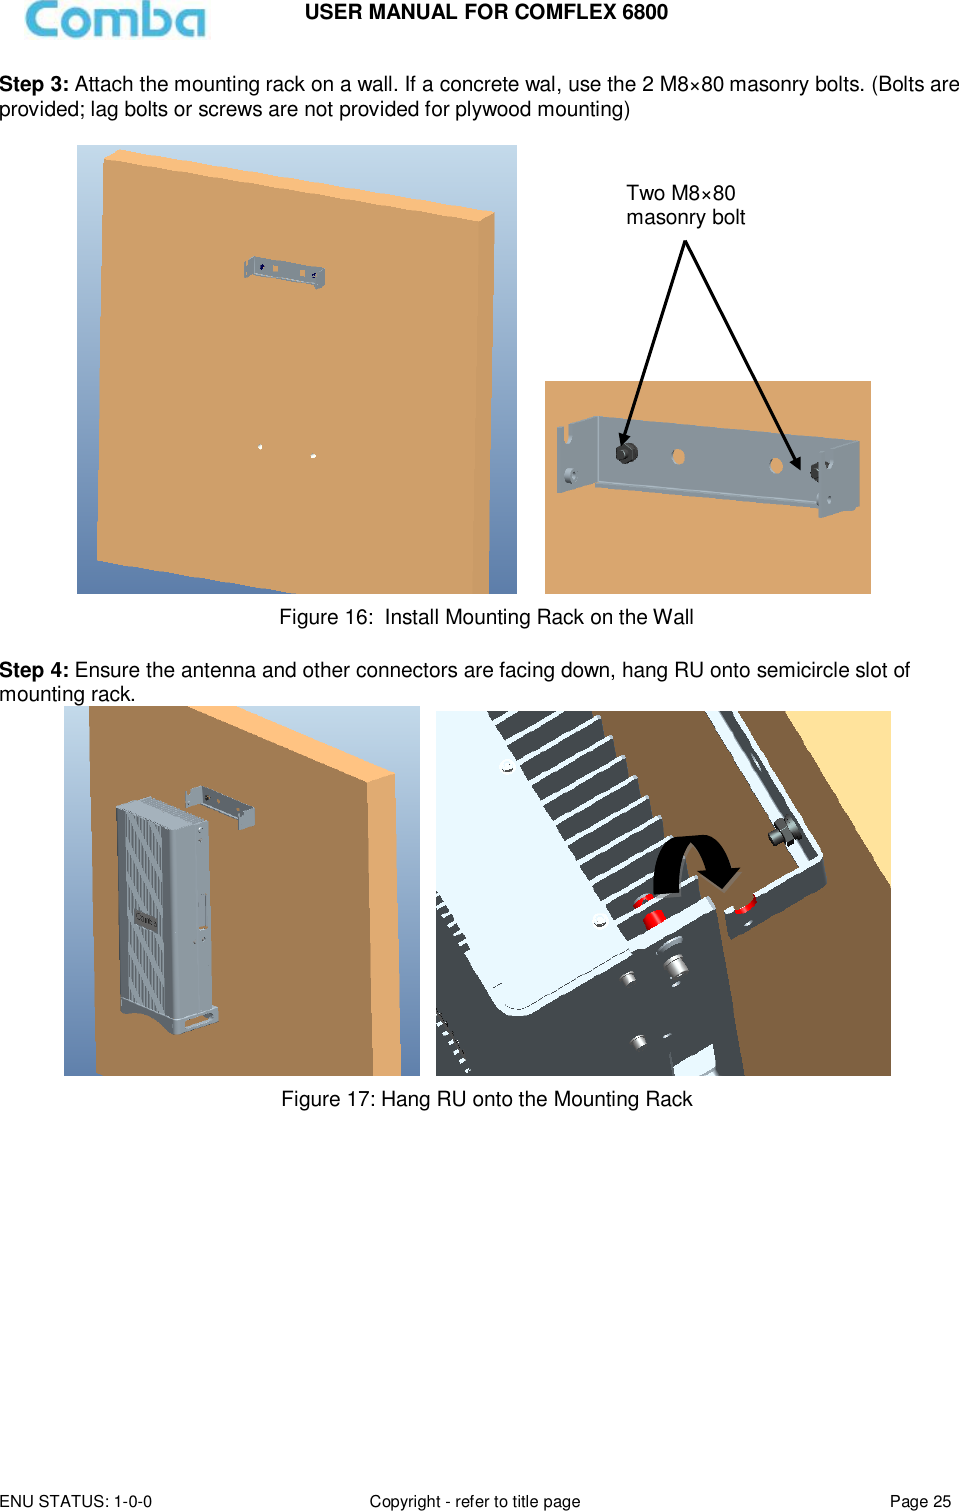 USER MANUAL FOR COMFLEX 6800 ENU STATUS: 1-0-0 Copyright - refer to title page Page 25  Step 3: Attach the mounting rack on a wall. If a concrete wal, use the 2 M8×80 masonry bolts. (Bolts are provided; lag bolts or screws are not provided for plywood mounting)        Figure 16:  Install Mounting Rack on the Wall  Step 4: Ensure the antenna and other connectors are facing down, hang RU onto semicircle slot of mounting rack.     Figure 17: Hang RU onto the Mounting Rack            Two M8×80 masonry bolt 